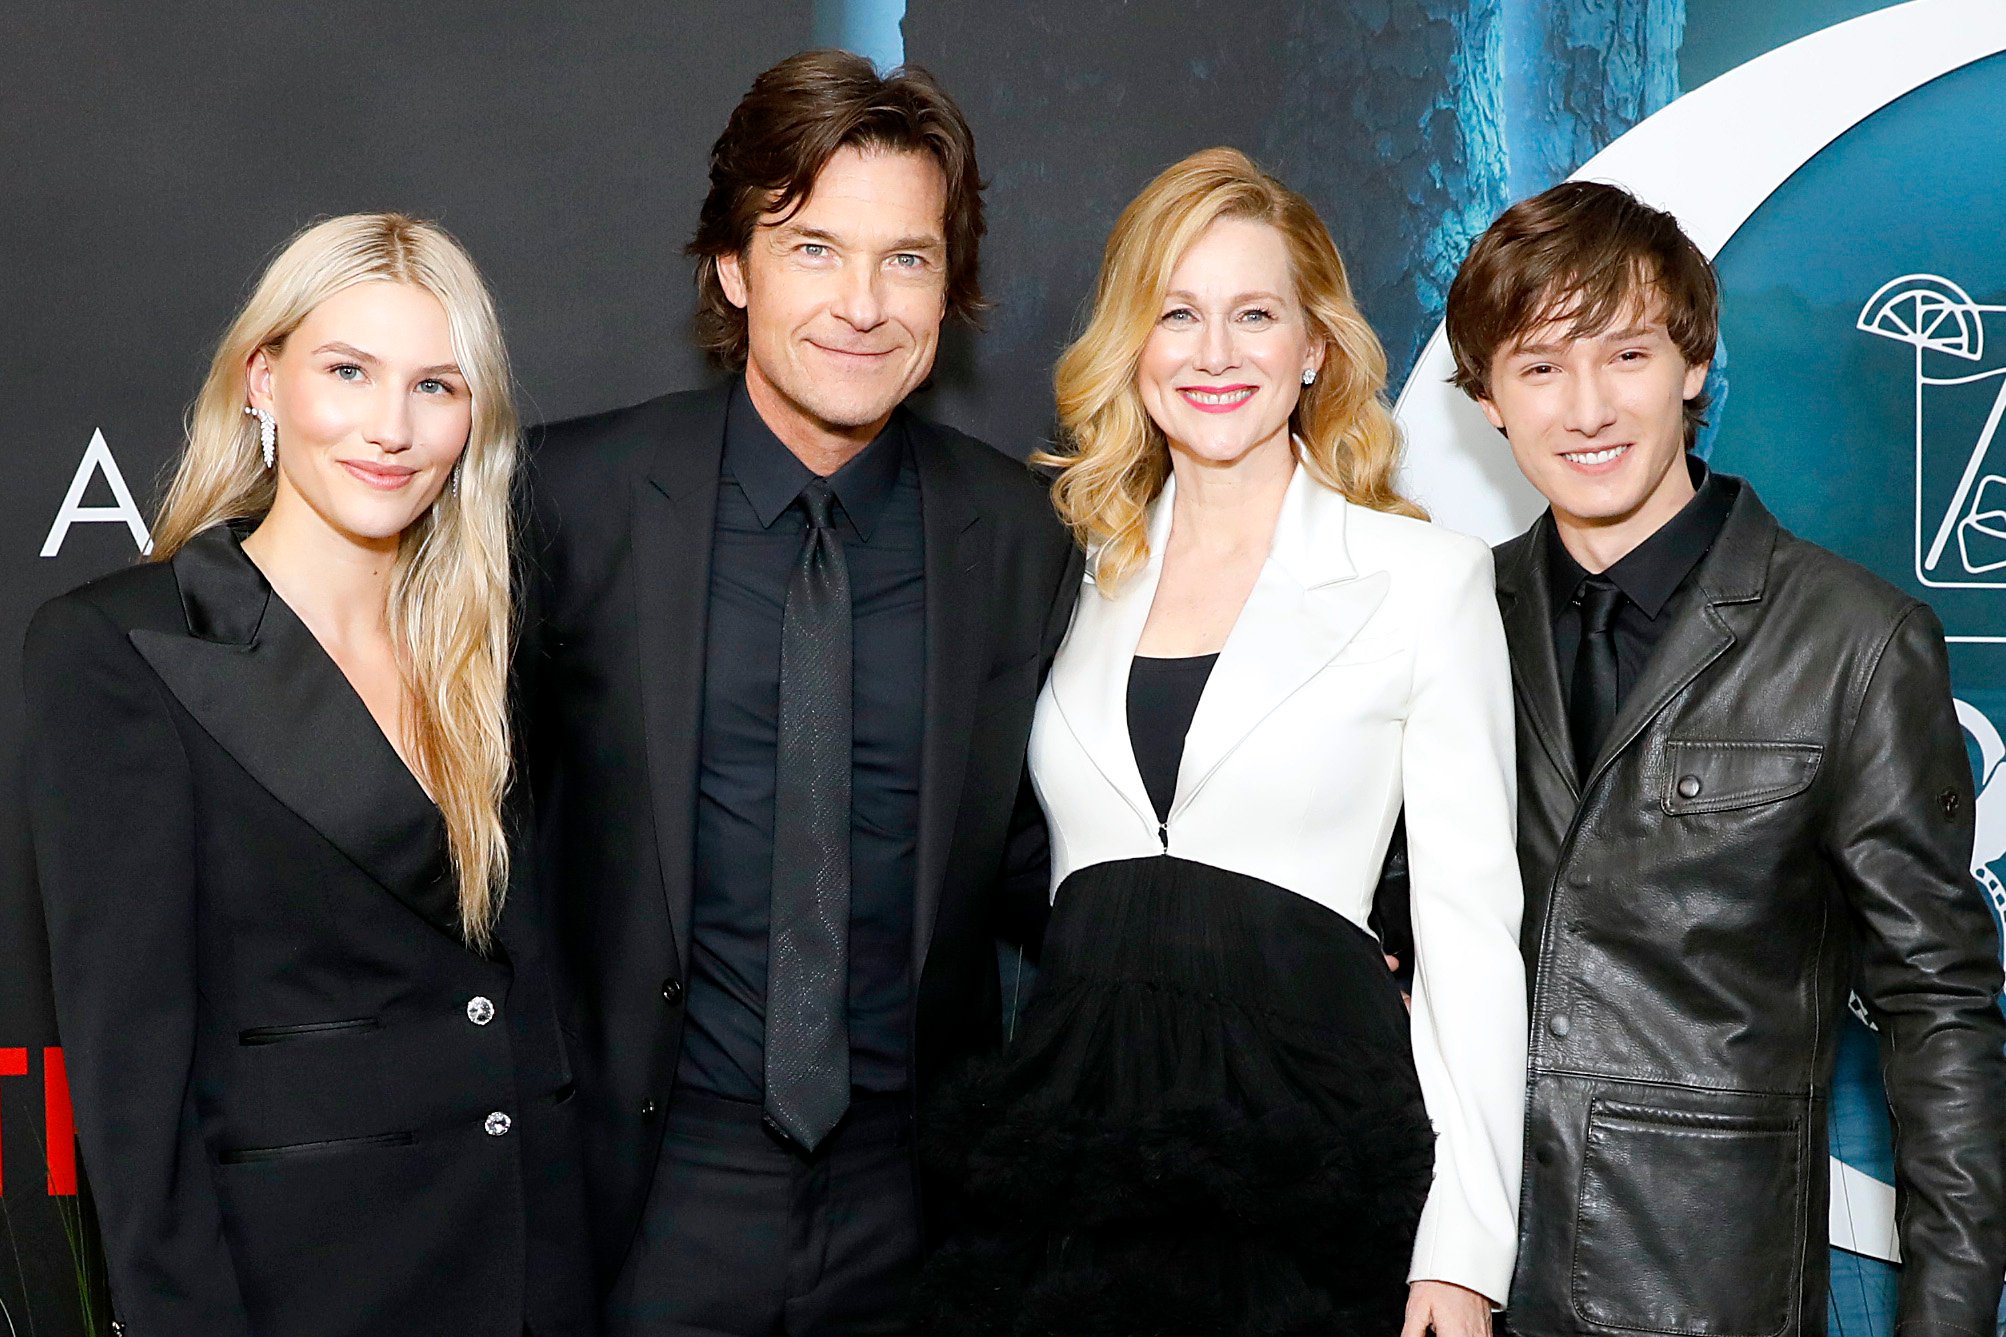 Cast members Sofia Hublitz, Jason Bateman, Laura Linney, and Skylar Gaertner attend the premiere of 'Ozark' Season 4. They're wearing formal clothes and standing next to one another, smiling.